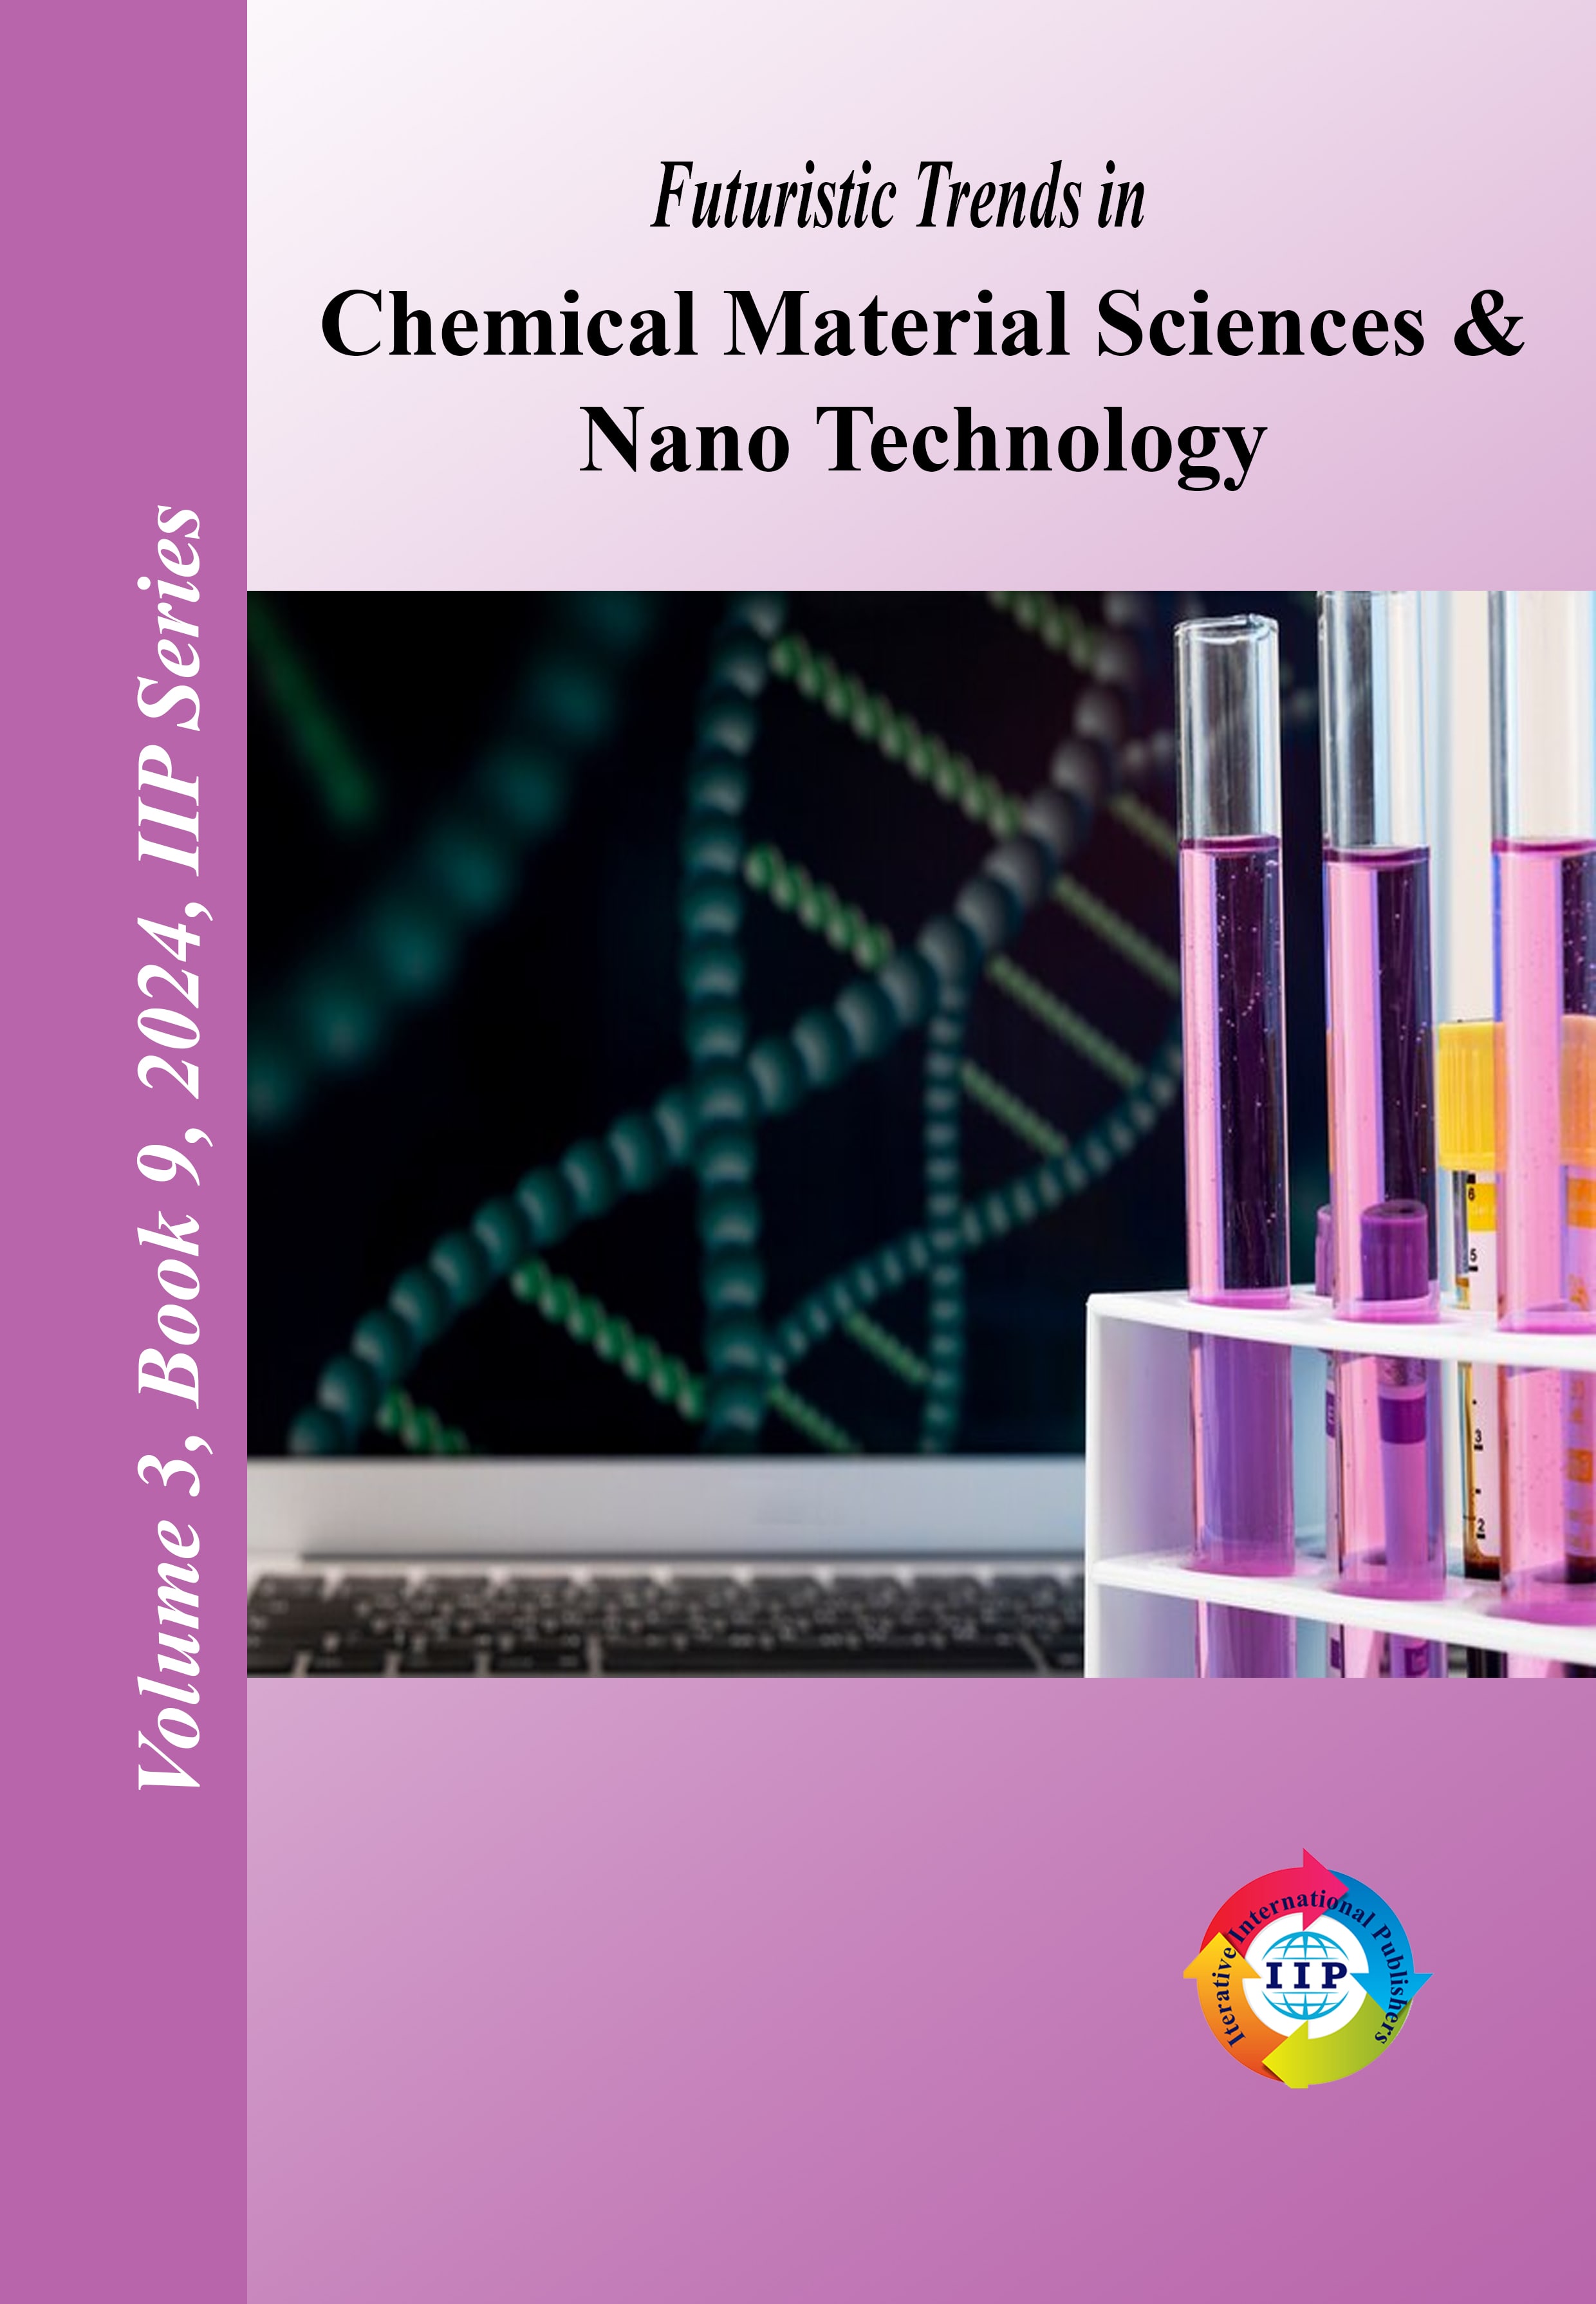 Futuristic Trends in Chemical Material Sciences & Nano Technology  Volume 3 Book 9